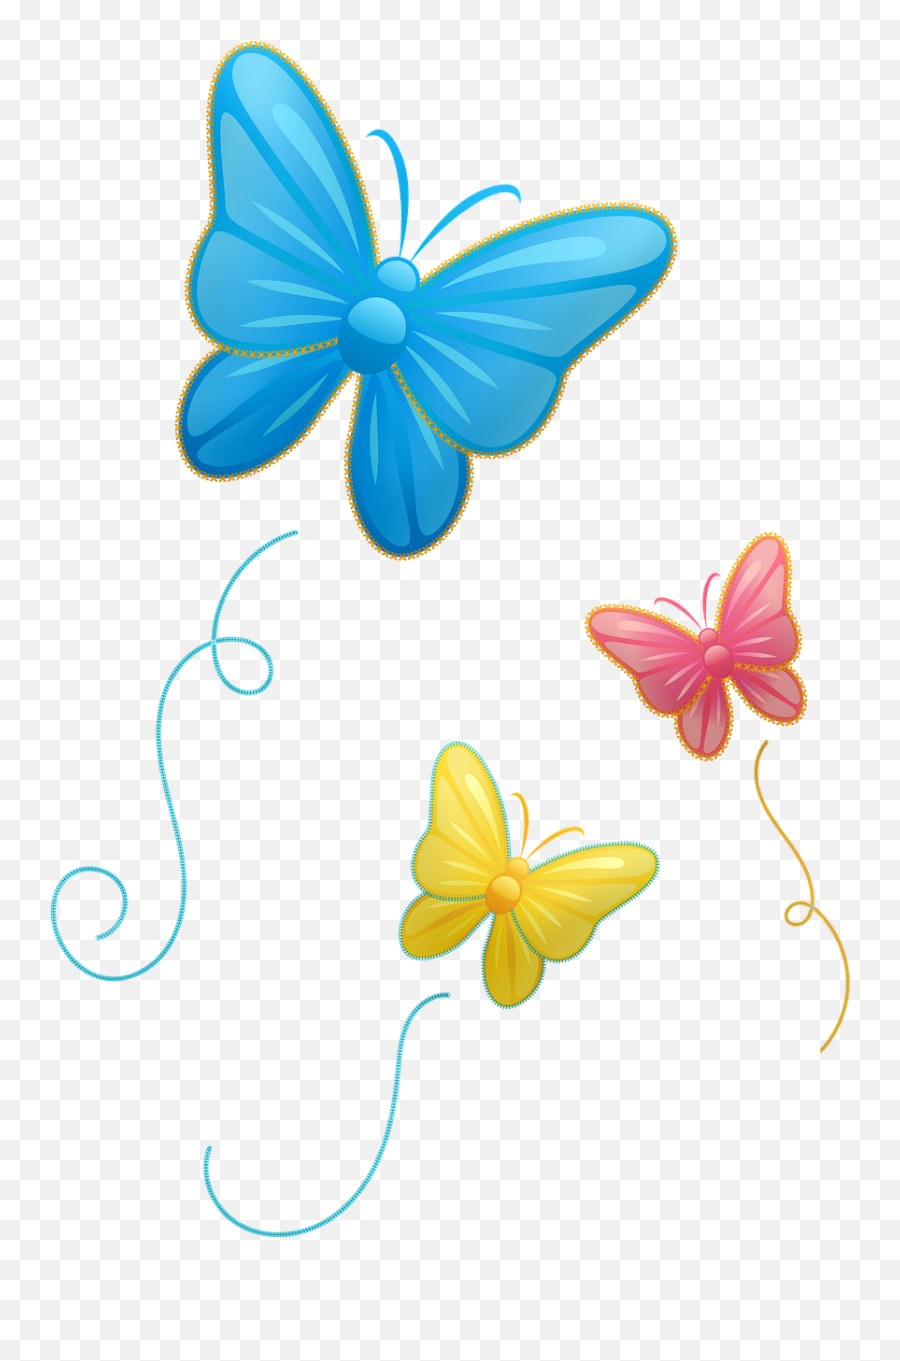 Butterflies Flying Insect - Free Image On Pixabay Girly Png,Butterfly Flying Png